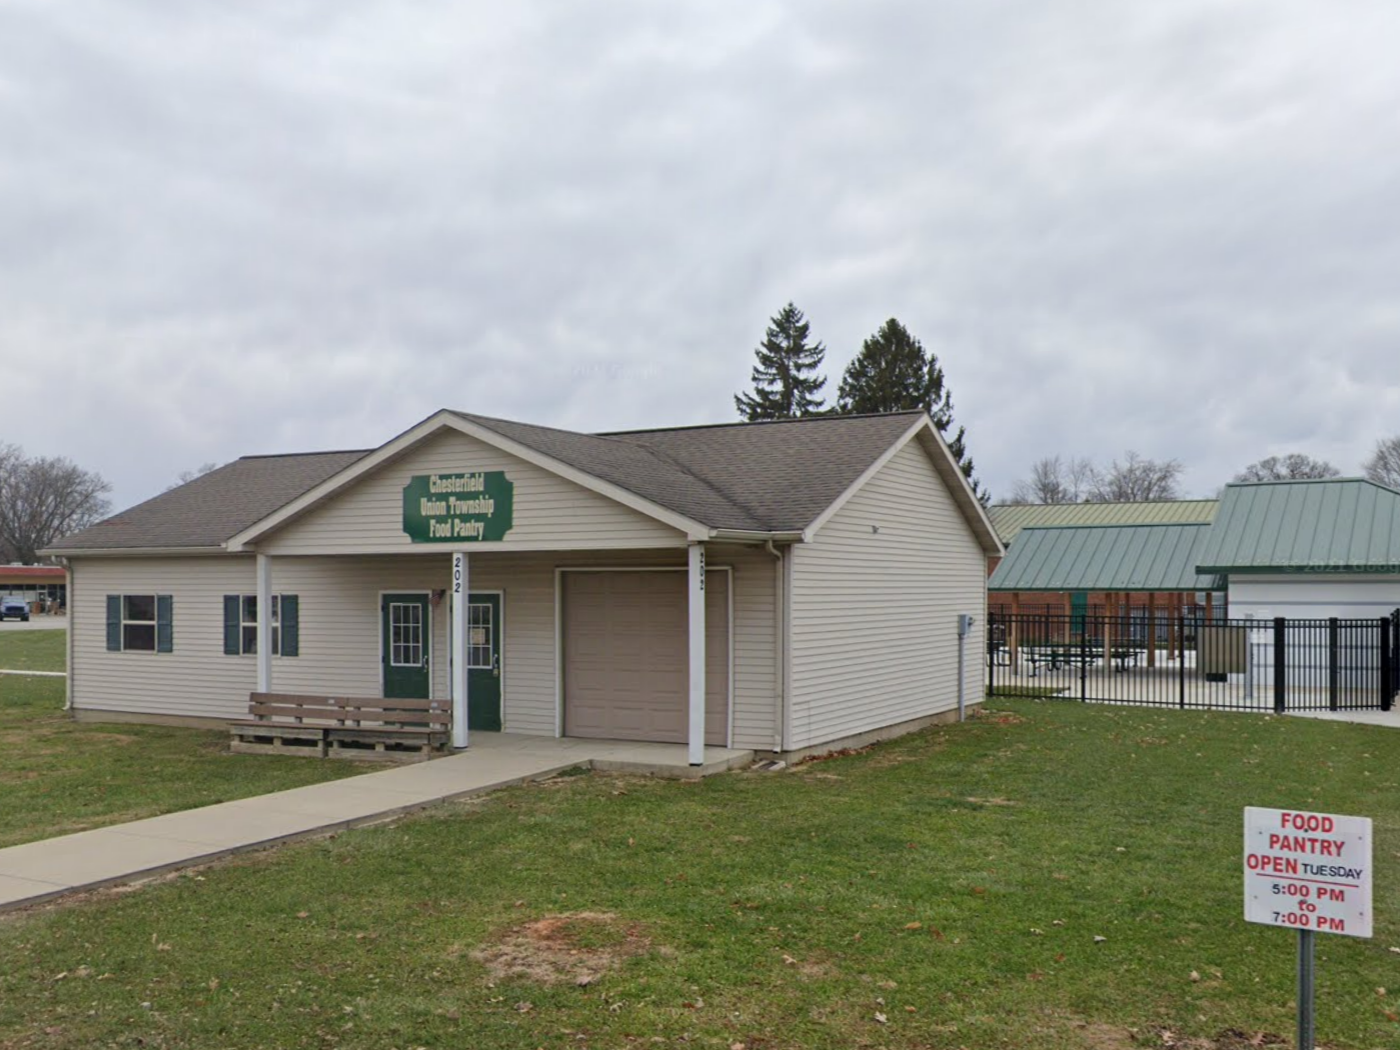 Chesterfield Union Township Community Food Pantry